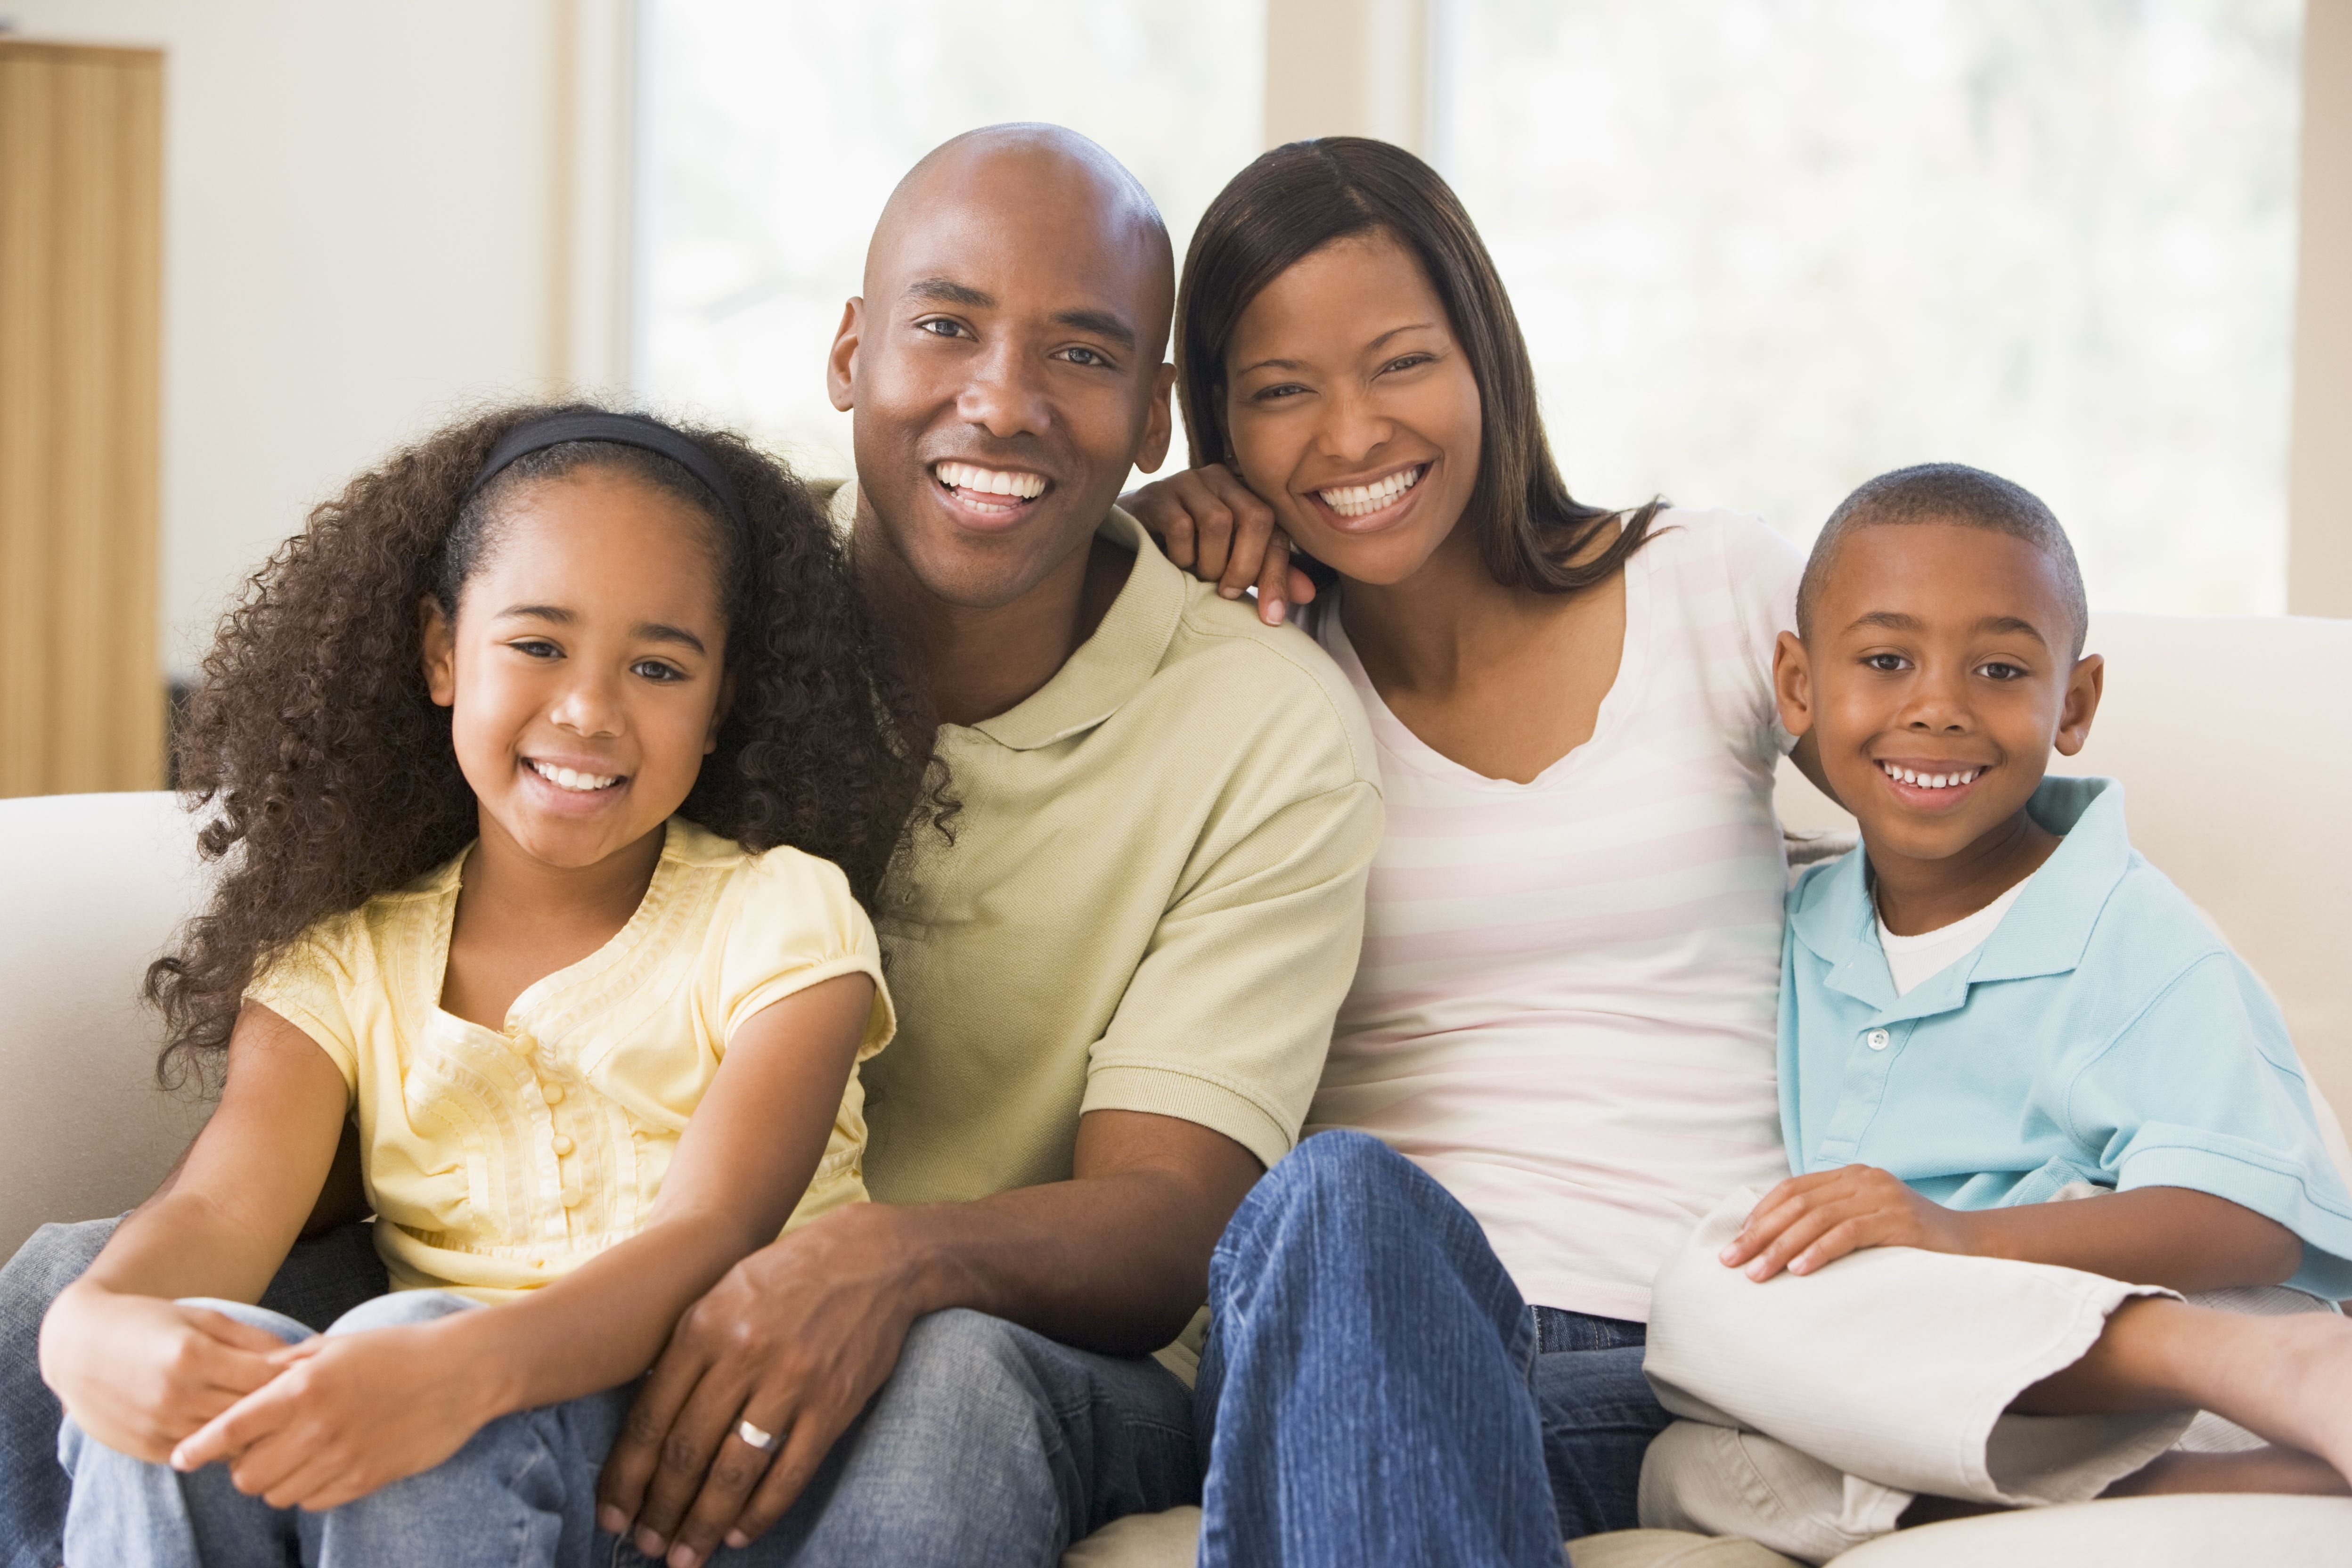 Where can I find a Family Dentist in Costa Mesa?